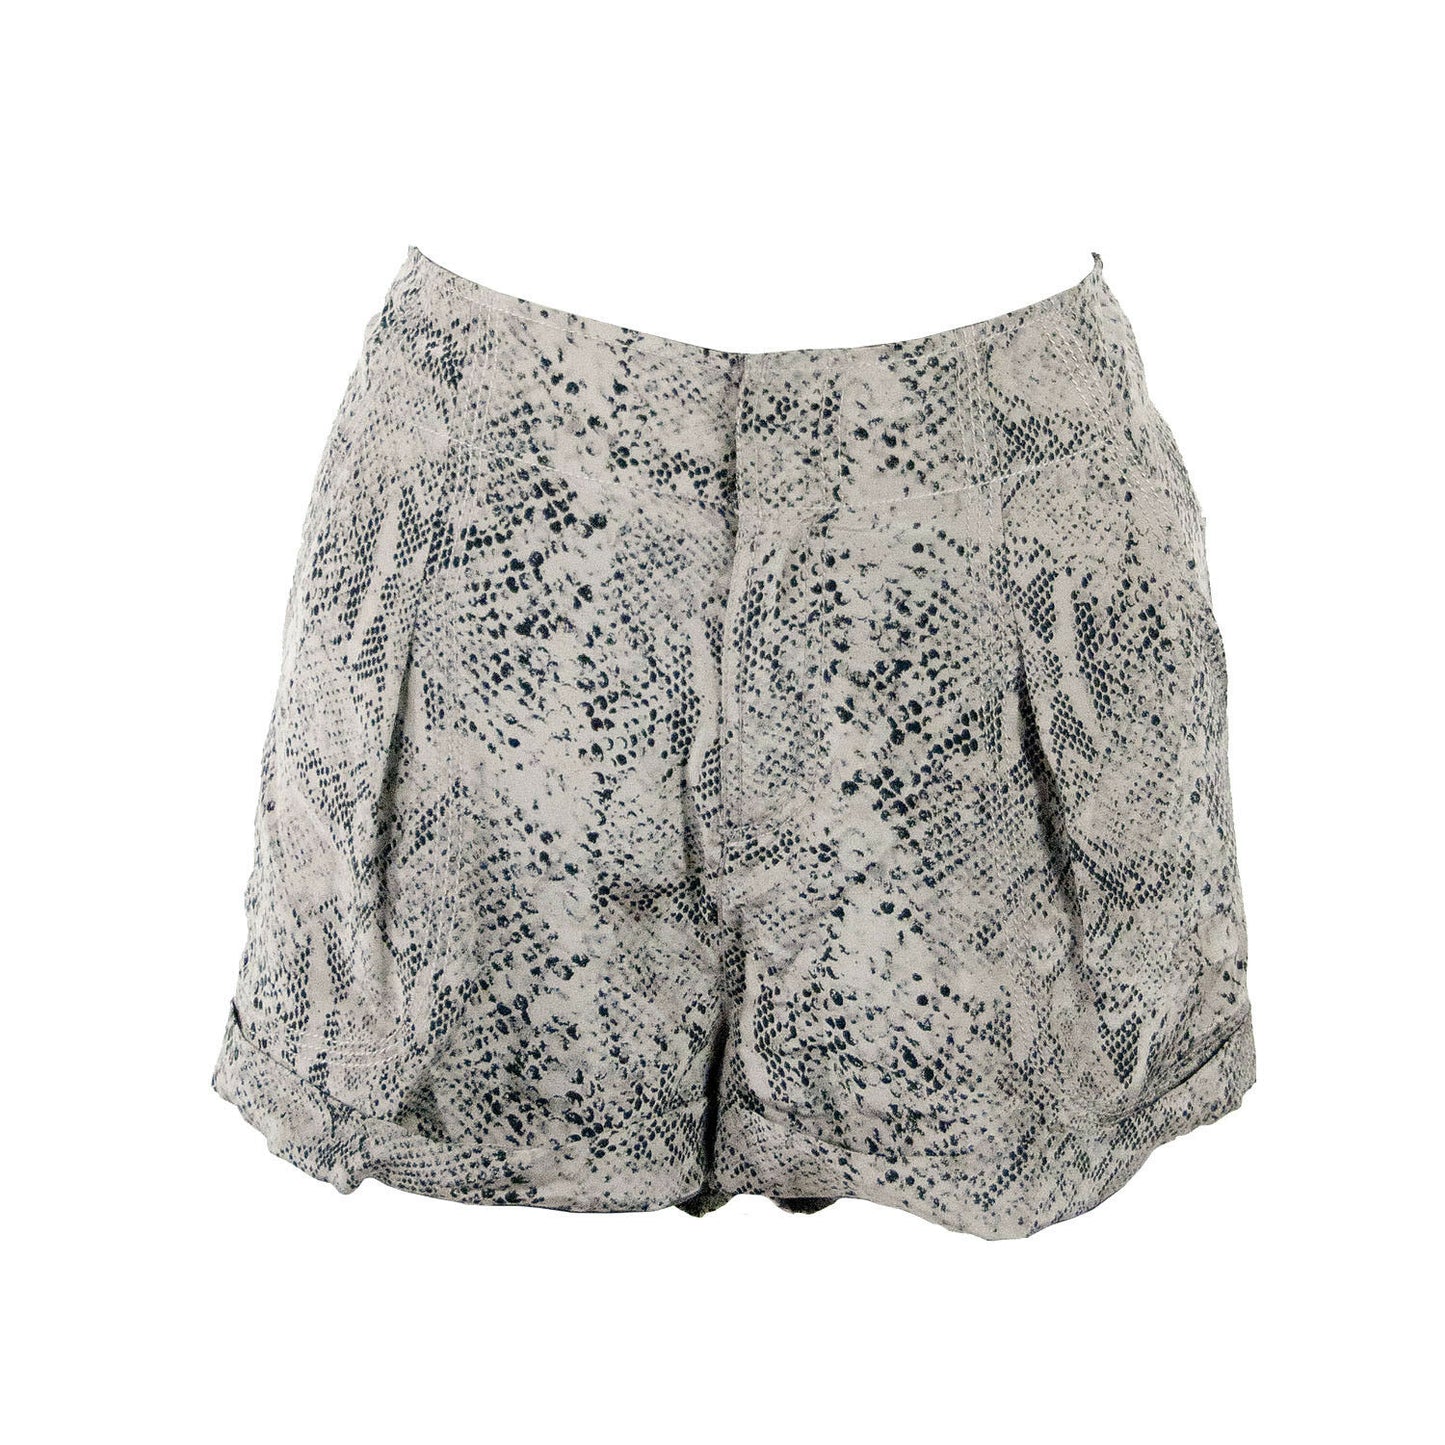 Rebecca Taylor Taupe Python Printed Swing Dress Shorts Size 4 NWT $225